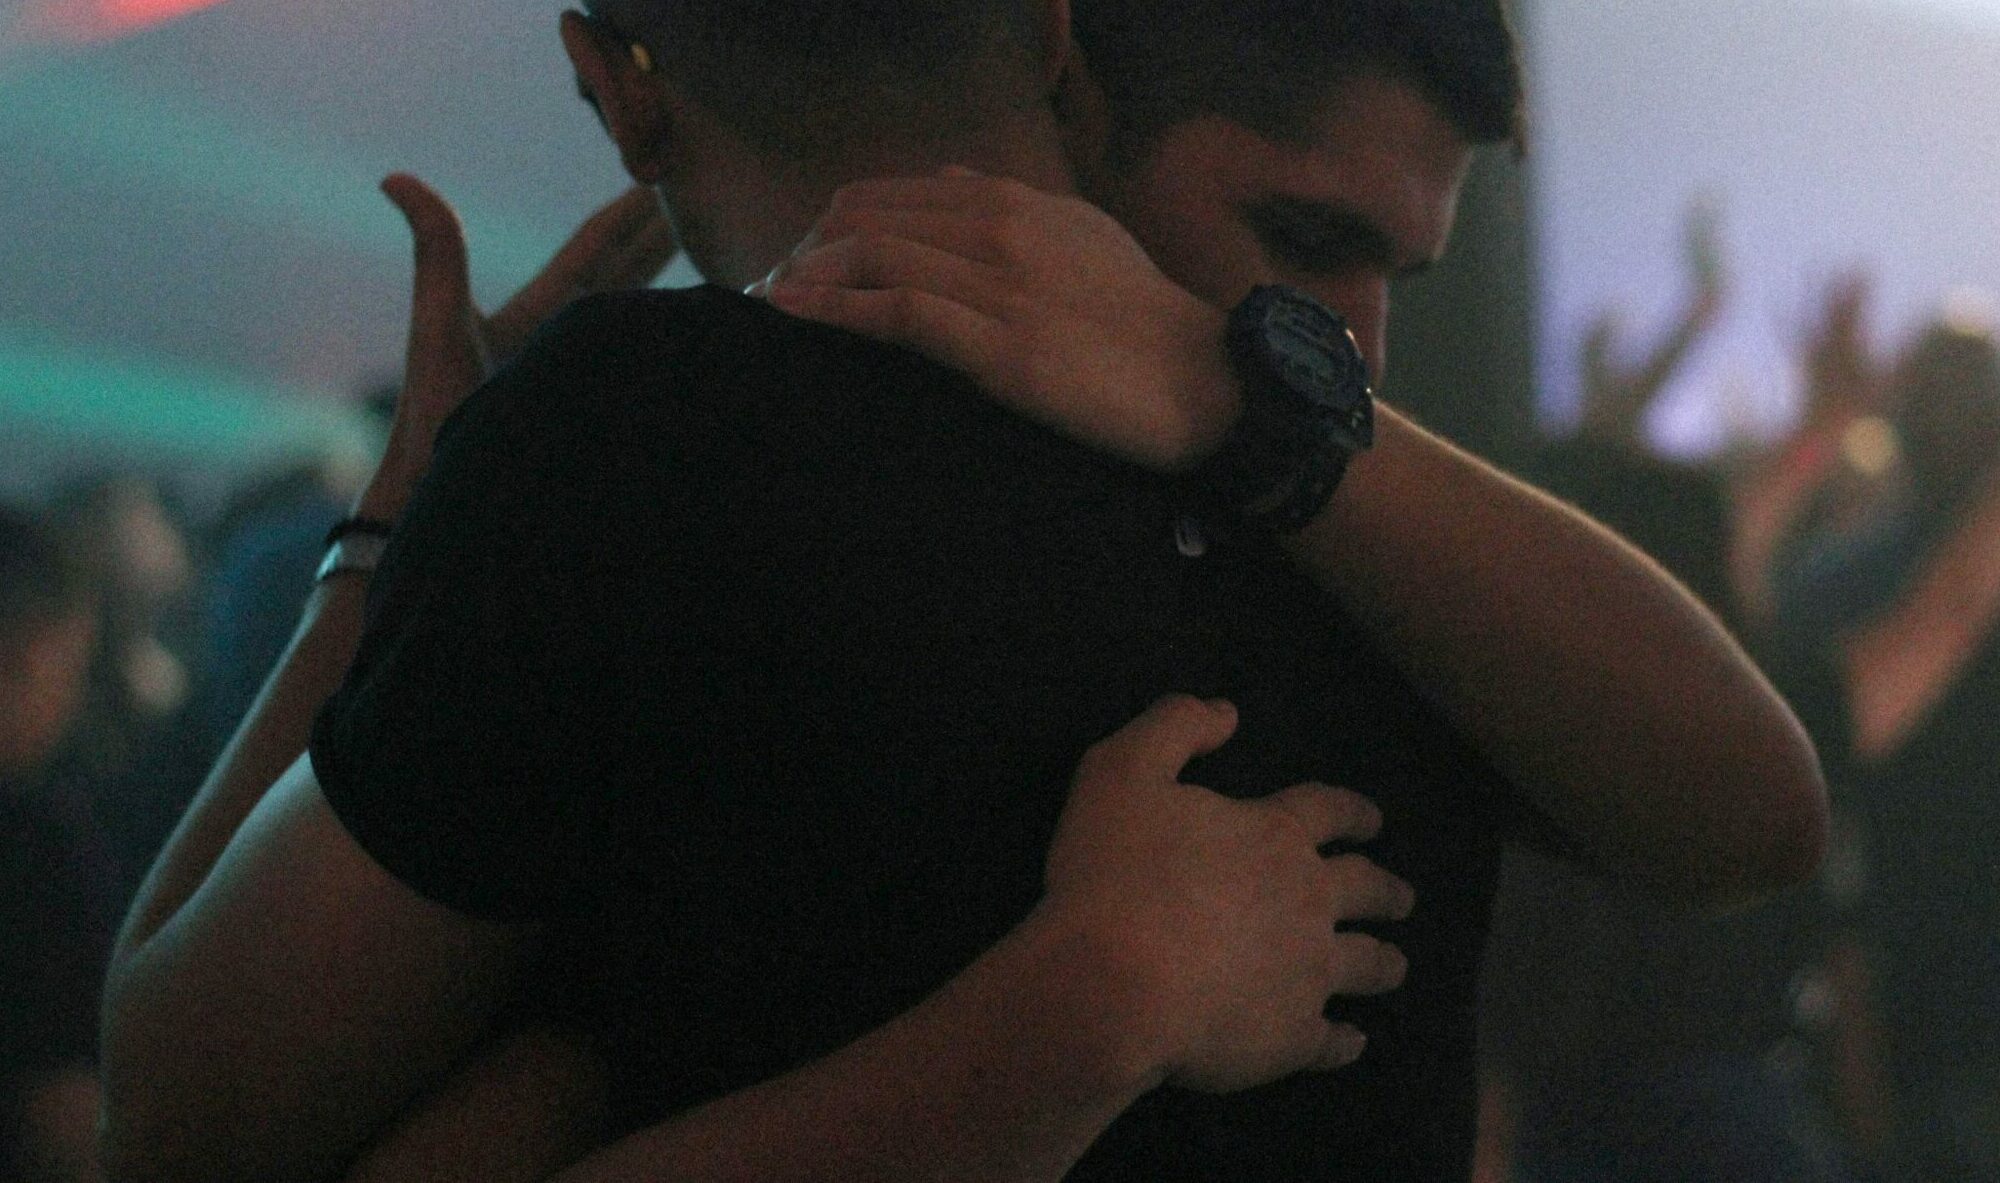 Men Hugging In a Crowded Room